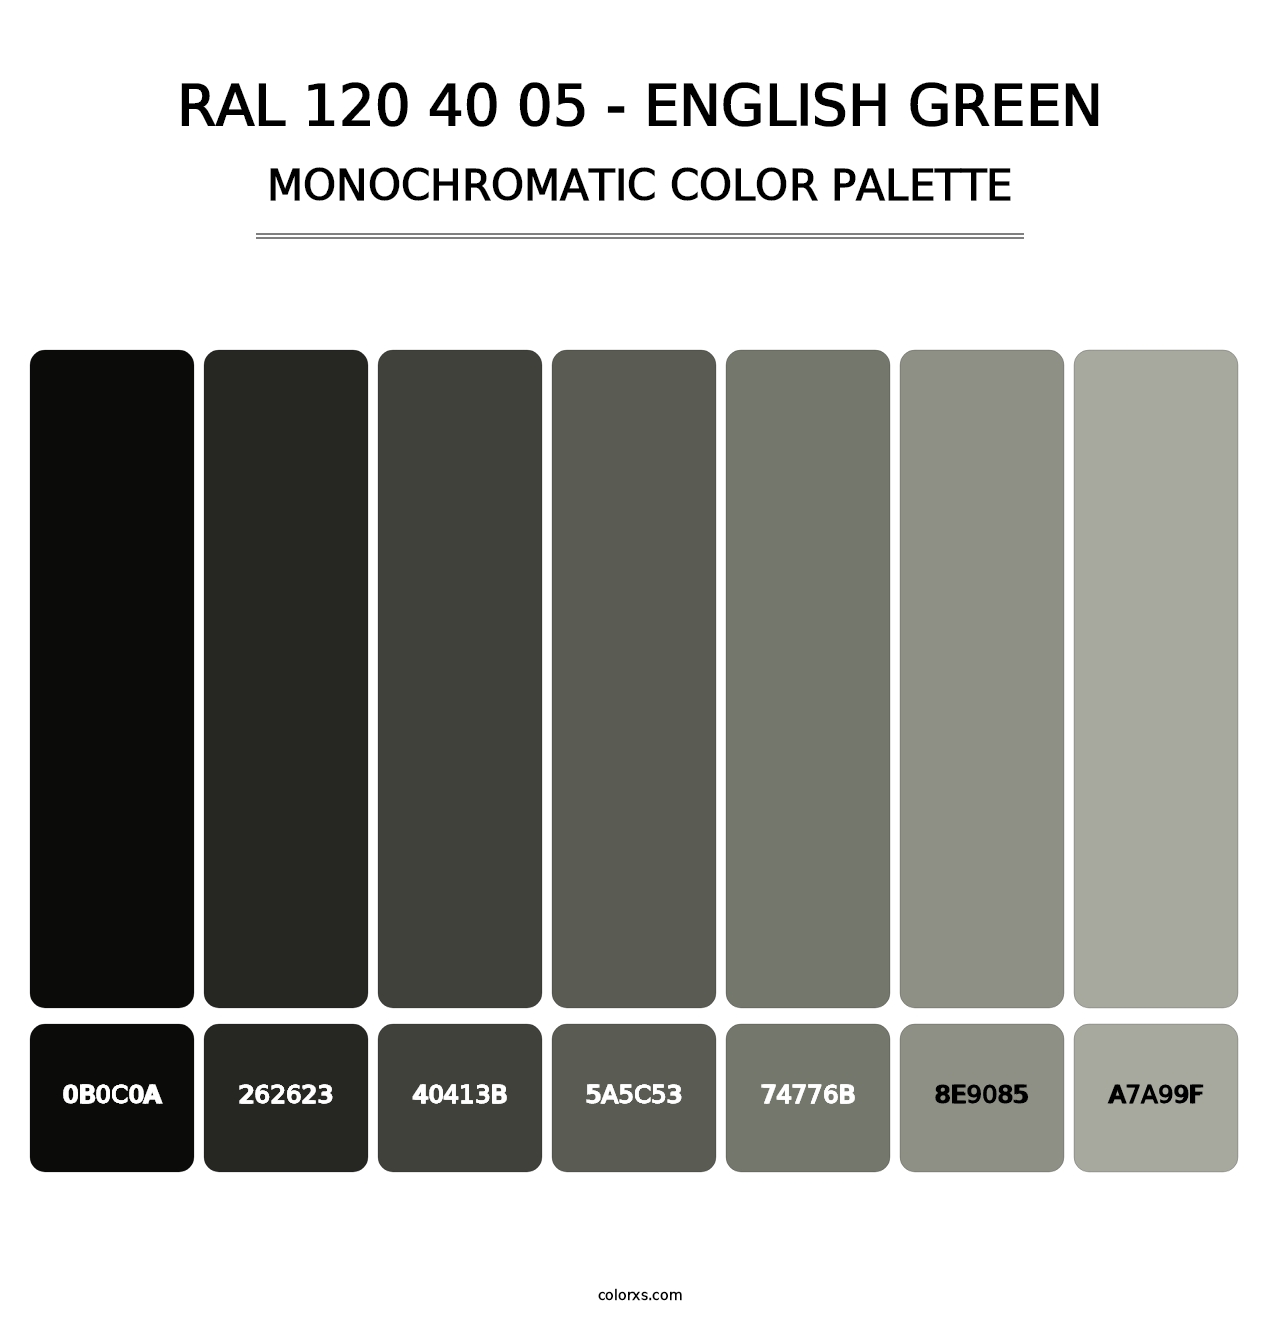 RAL 120 40 05 - English Green - Monochromatic Color Palette